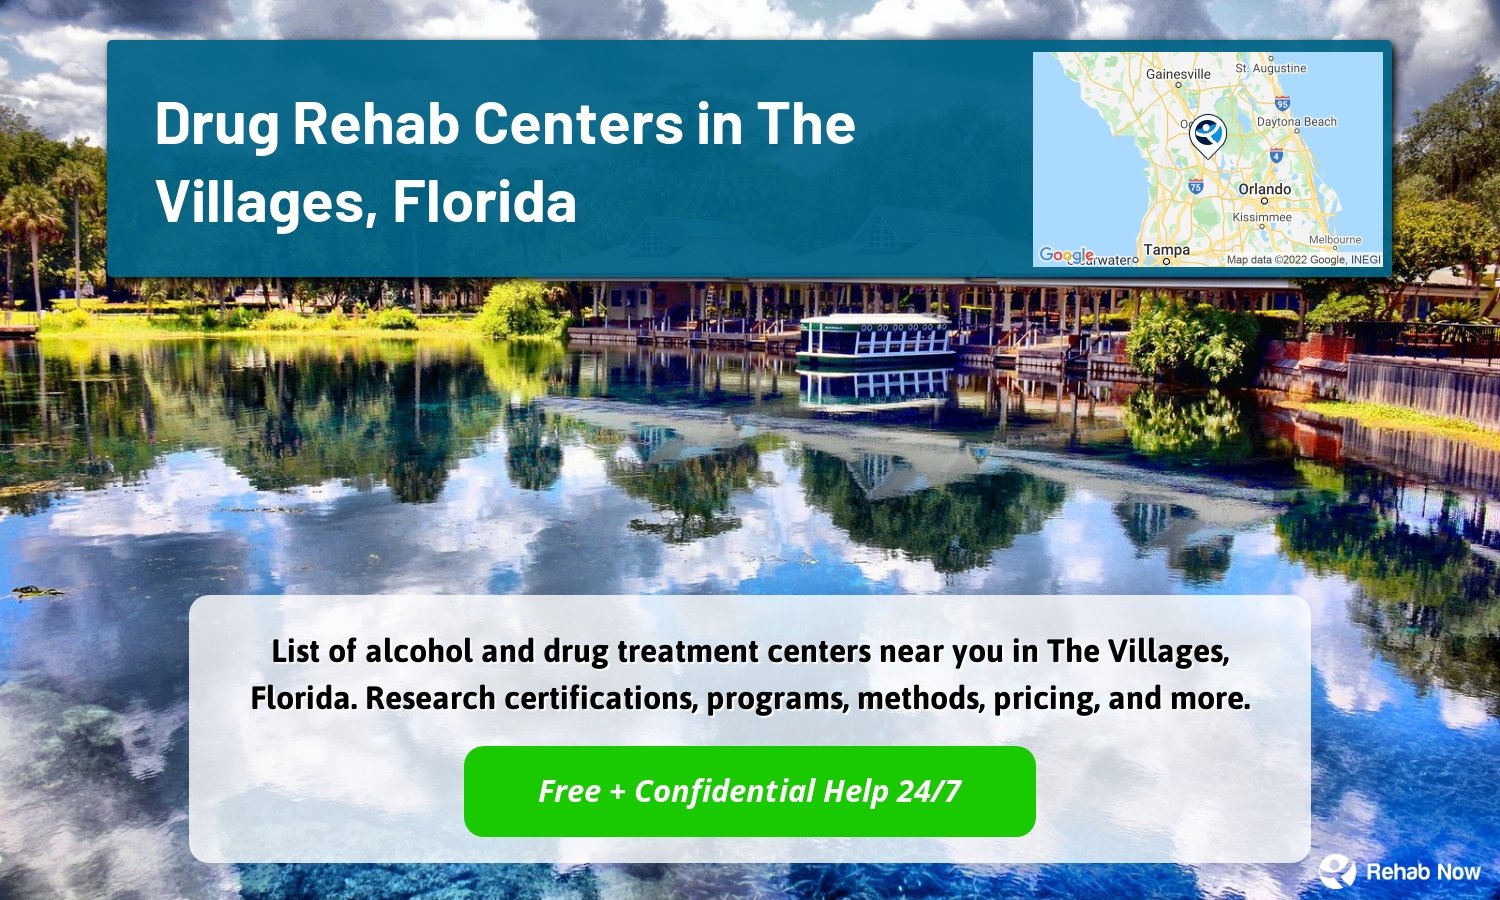 List of alcohol and drug treatment centers near you in The Villages, Florida. Research certifications, programs, methods, pricing, and more.